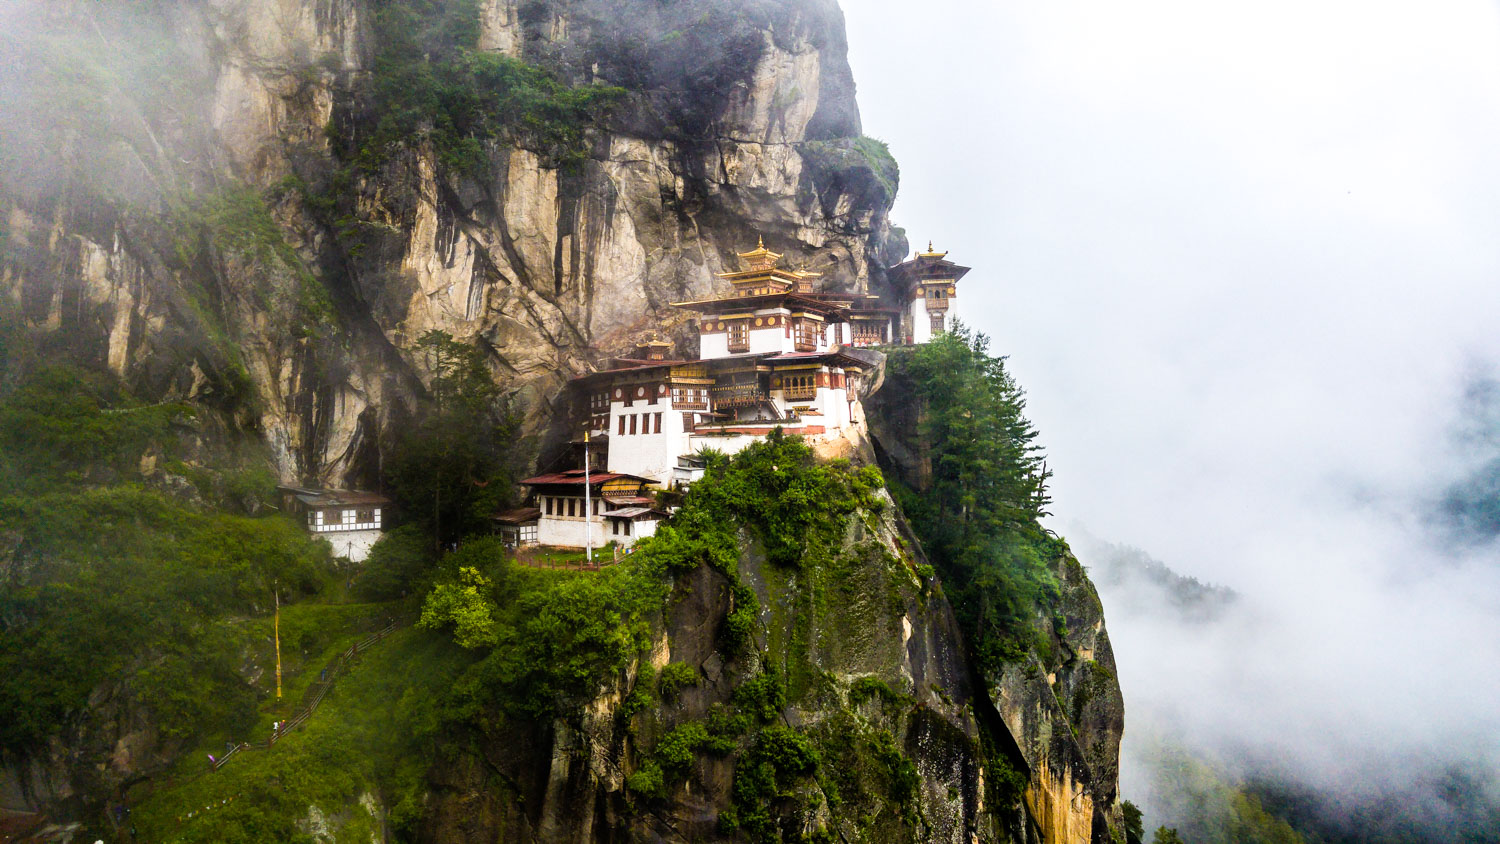 The Tiger Nest Monastery in Bhutan Travel Guide